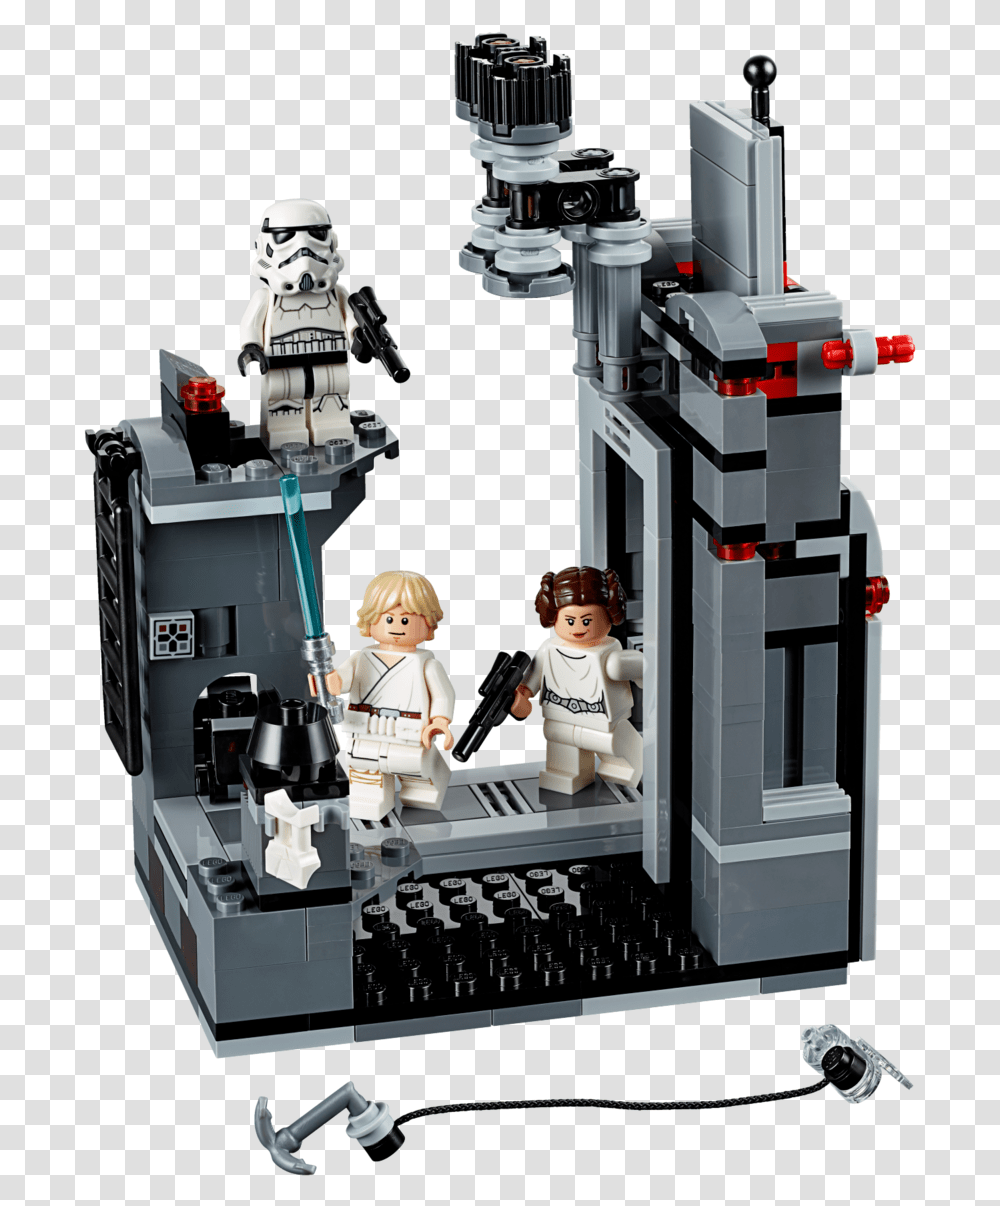 Deathstar Lego Death Star Escape 1589419 Vippng Lego Star Wars Death Star Escape, Toy, Person, Human, Robot Transparent Png